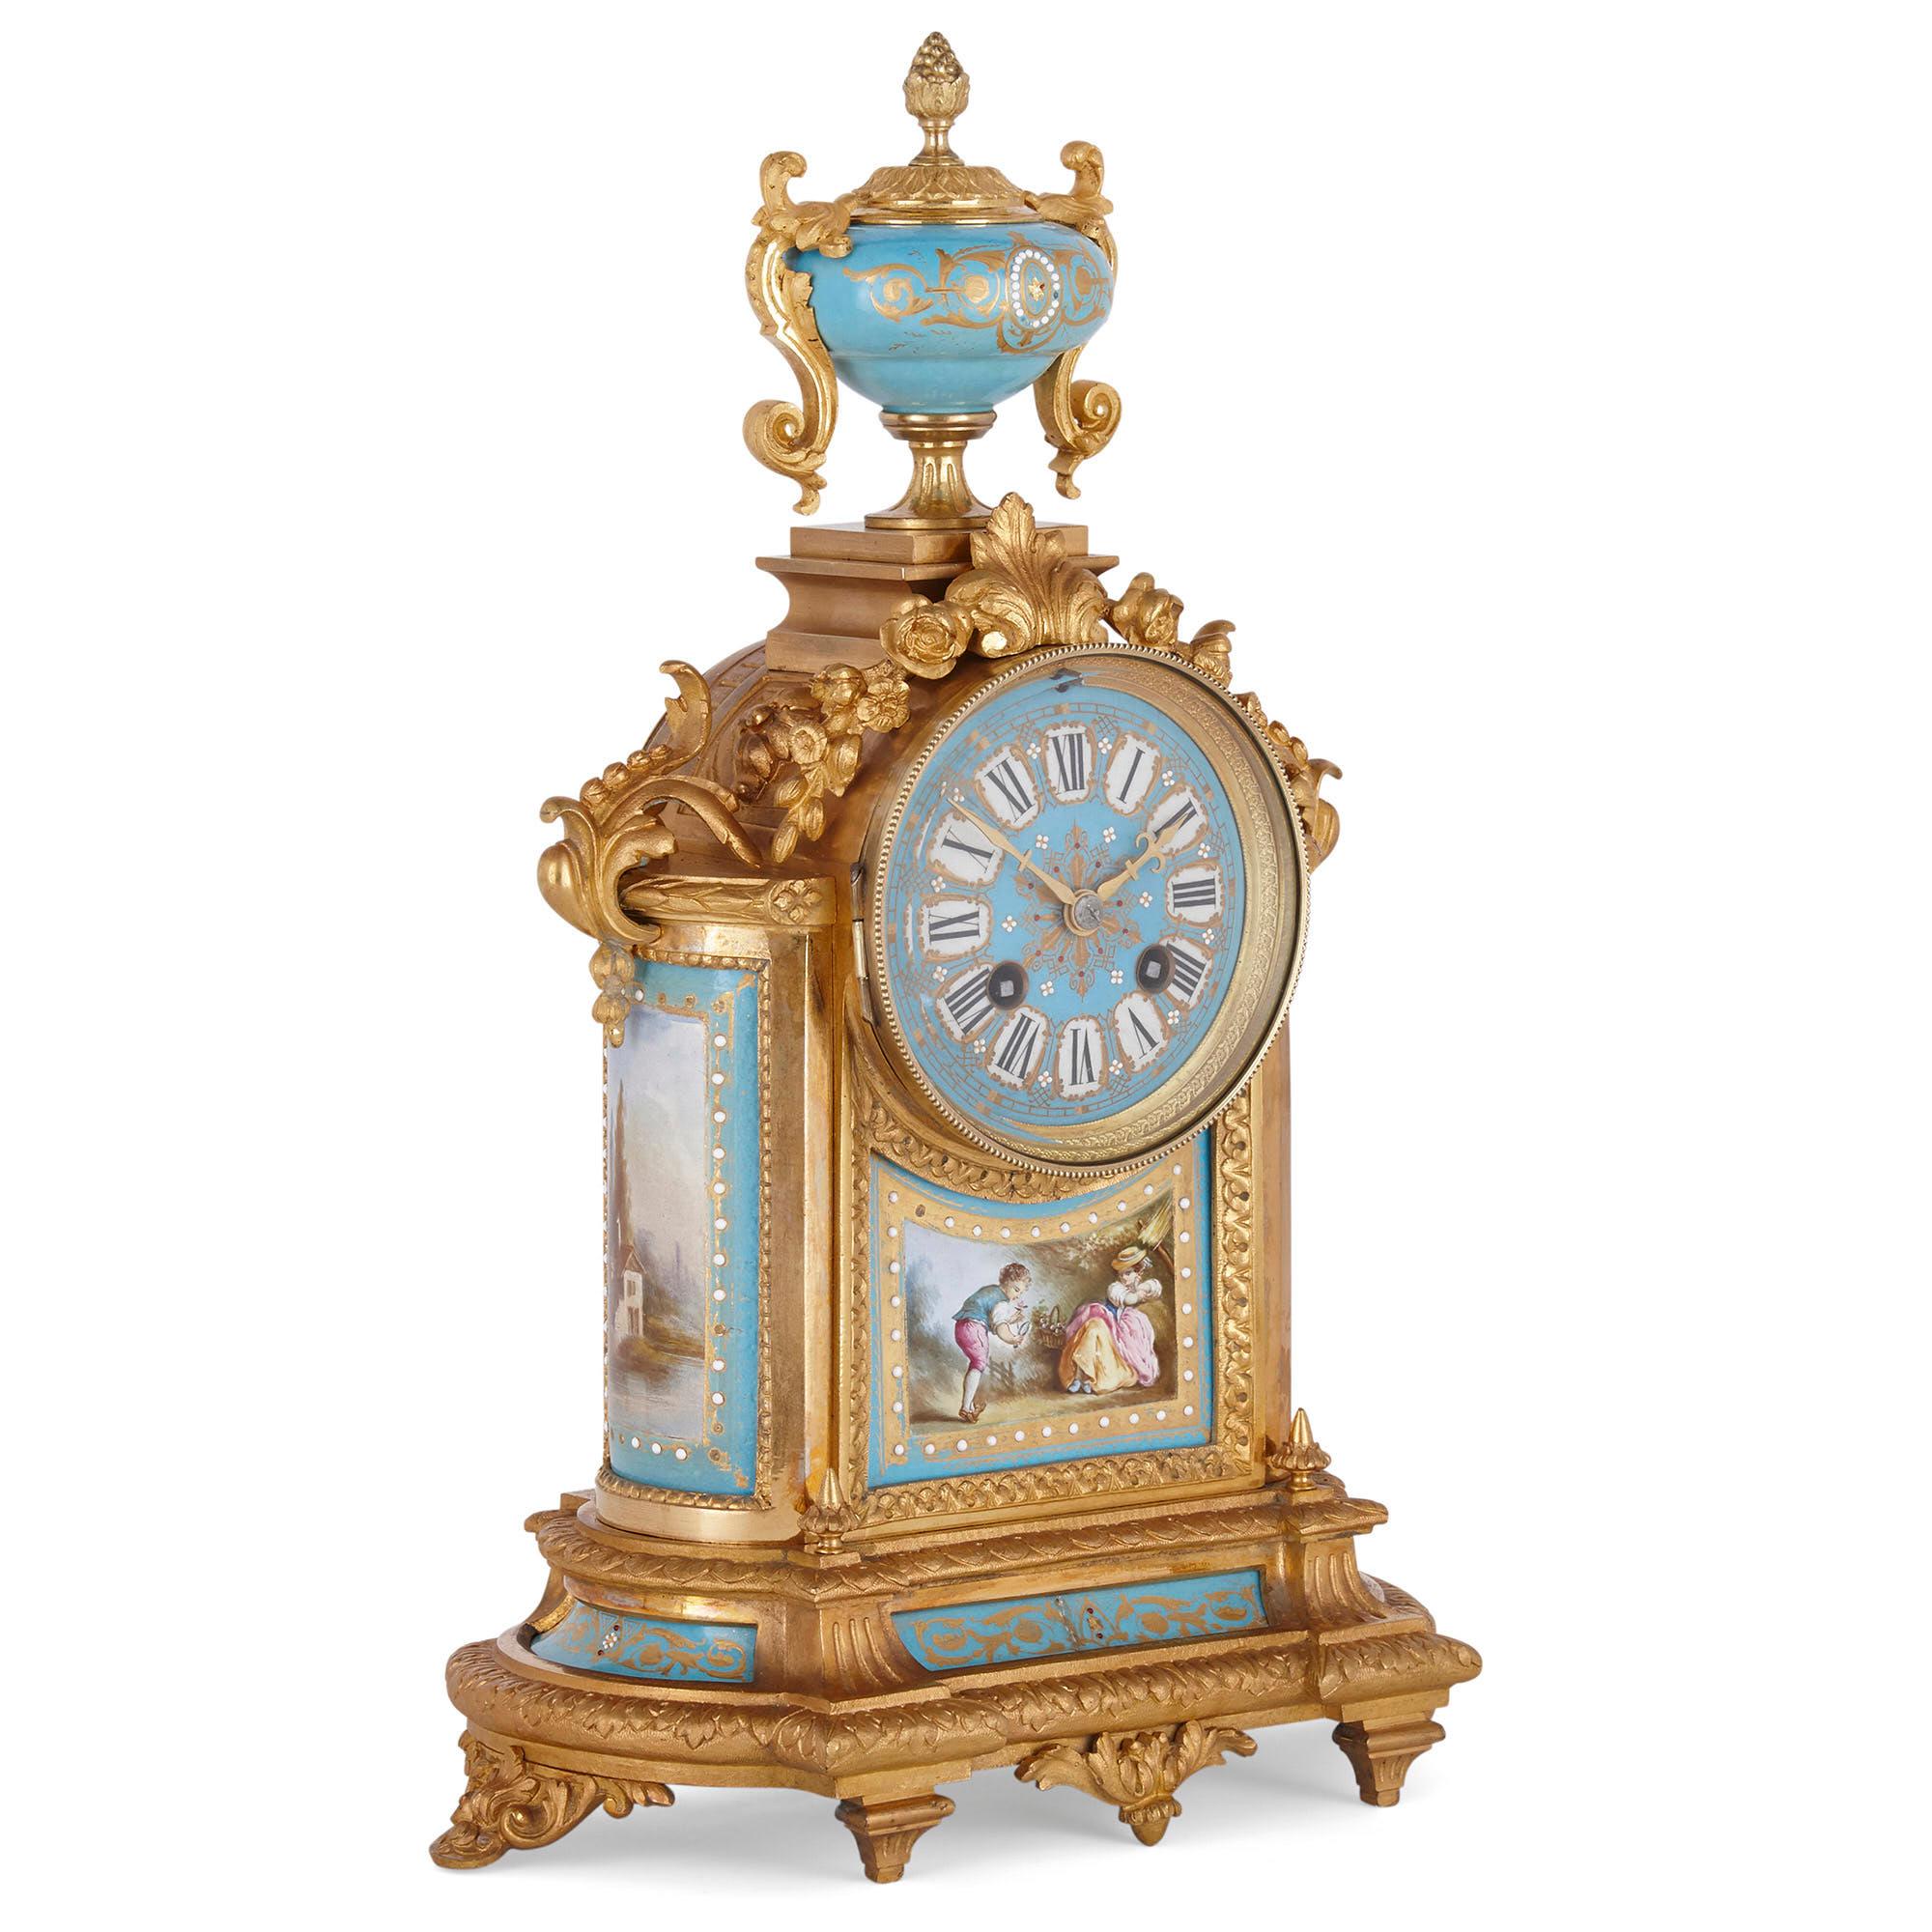 Rococo style gilt bronze mounted porcelain clock garniture
French, late 19th century
Measures: Clock: Height 38cm, width 27cm, depth 13cm
Ewers: Height 32cm, width 14cm, depth 9cm

This beautiful clock set includes a mantel clock and a charming